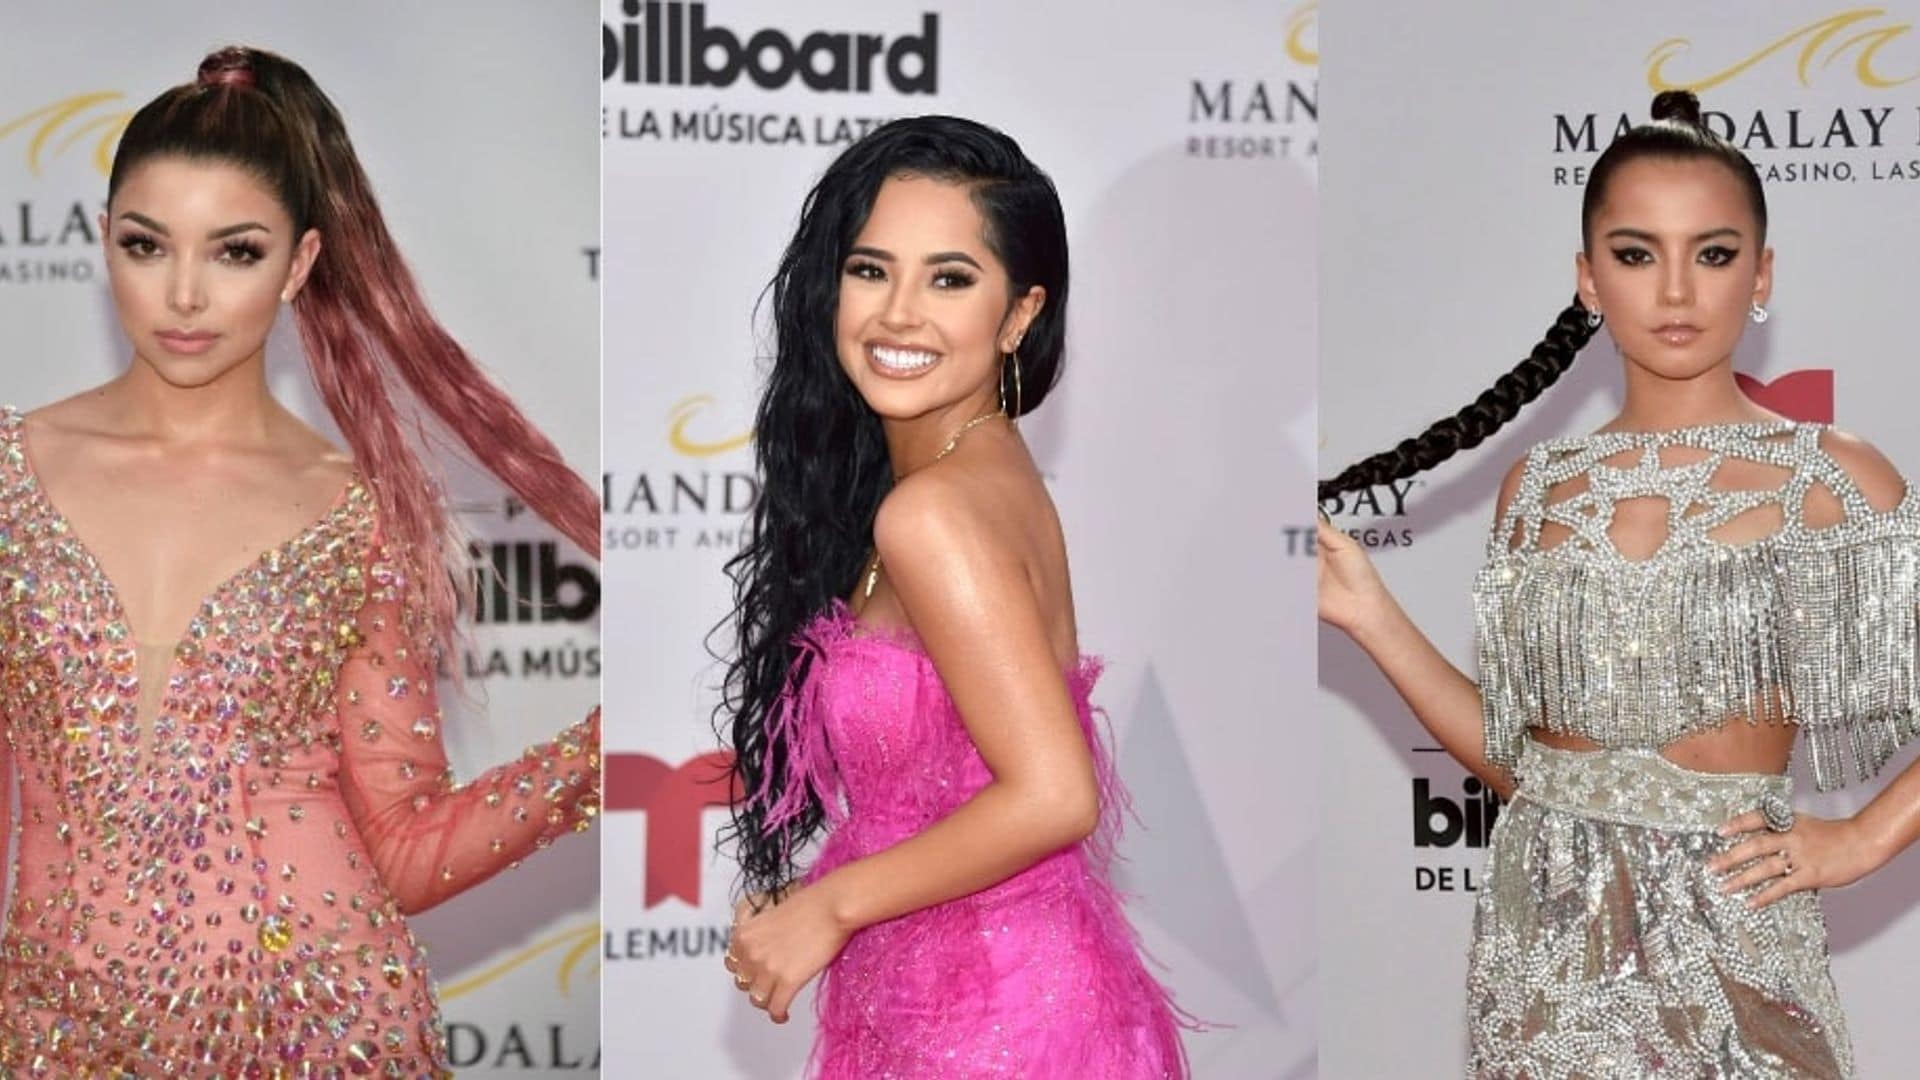 See all the best beauty moments from the 2019 Billboard Latin Music Awards Red Carpet